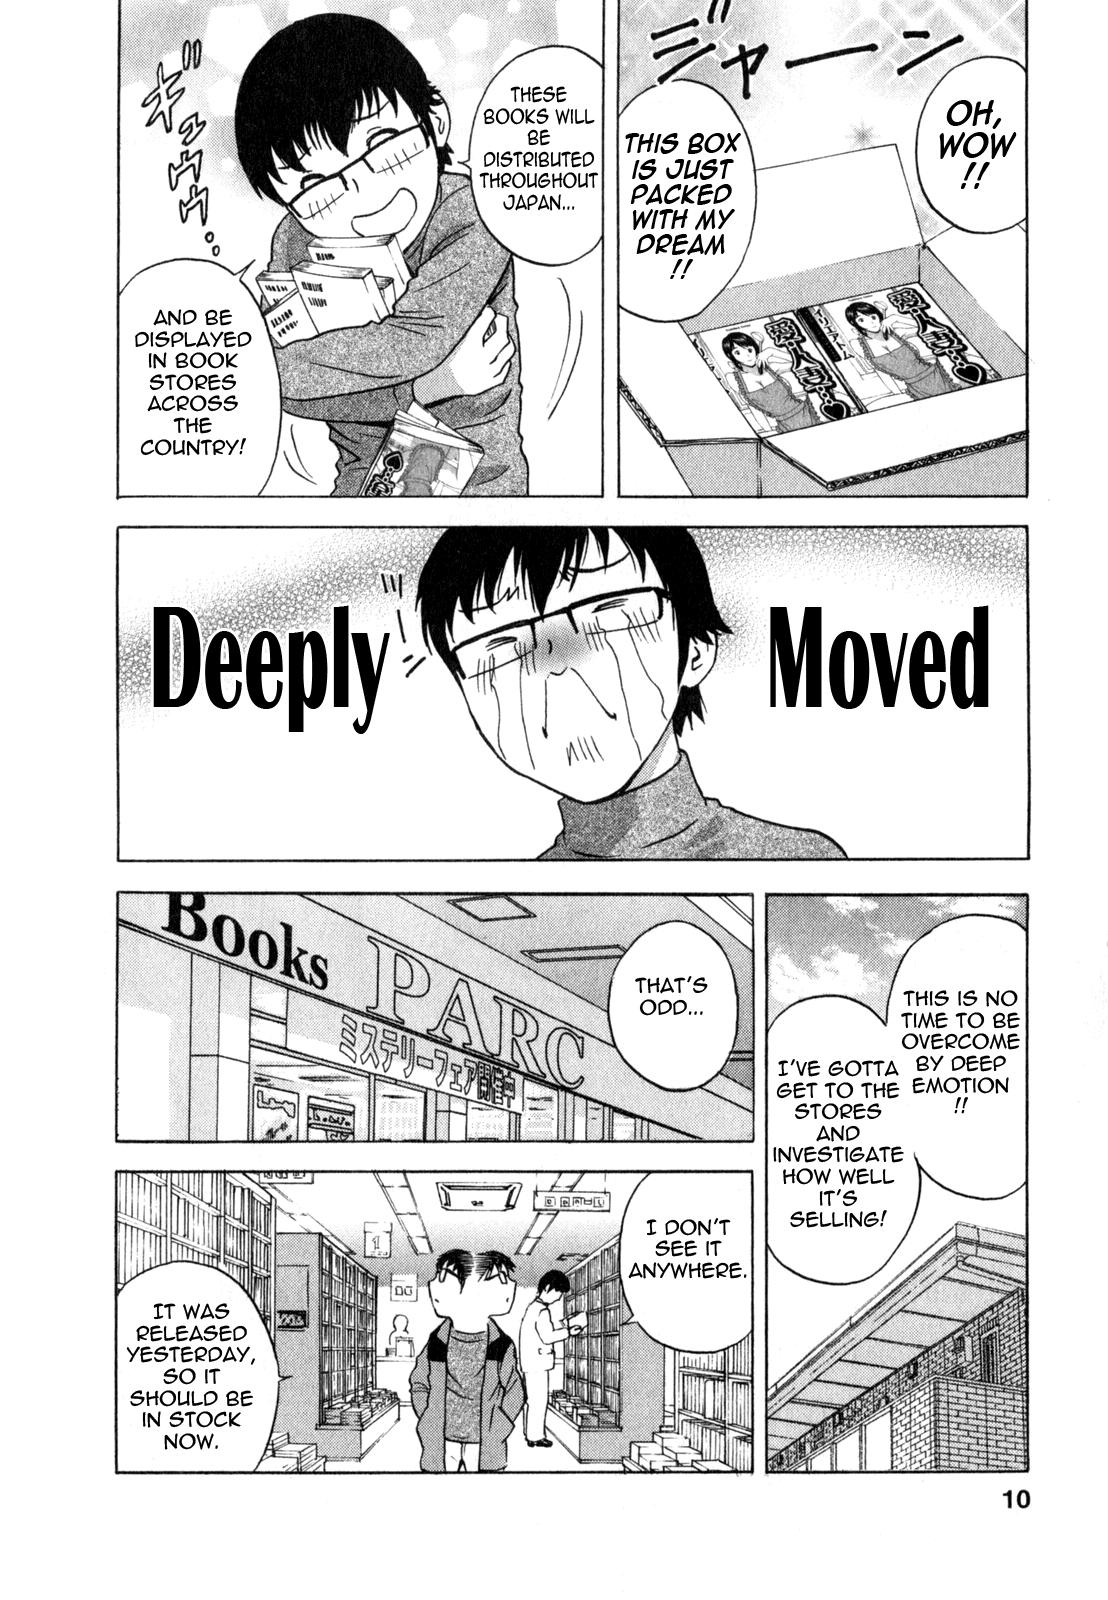 Best Blowjobs [Hidemaru] Life with Married Women Just Like a Manga 3 - Ch. 1-4 [English] {Tadanohito} Gay Hairy - Page 12